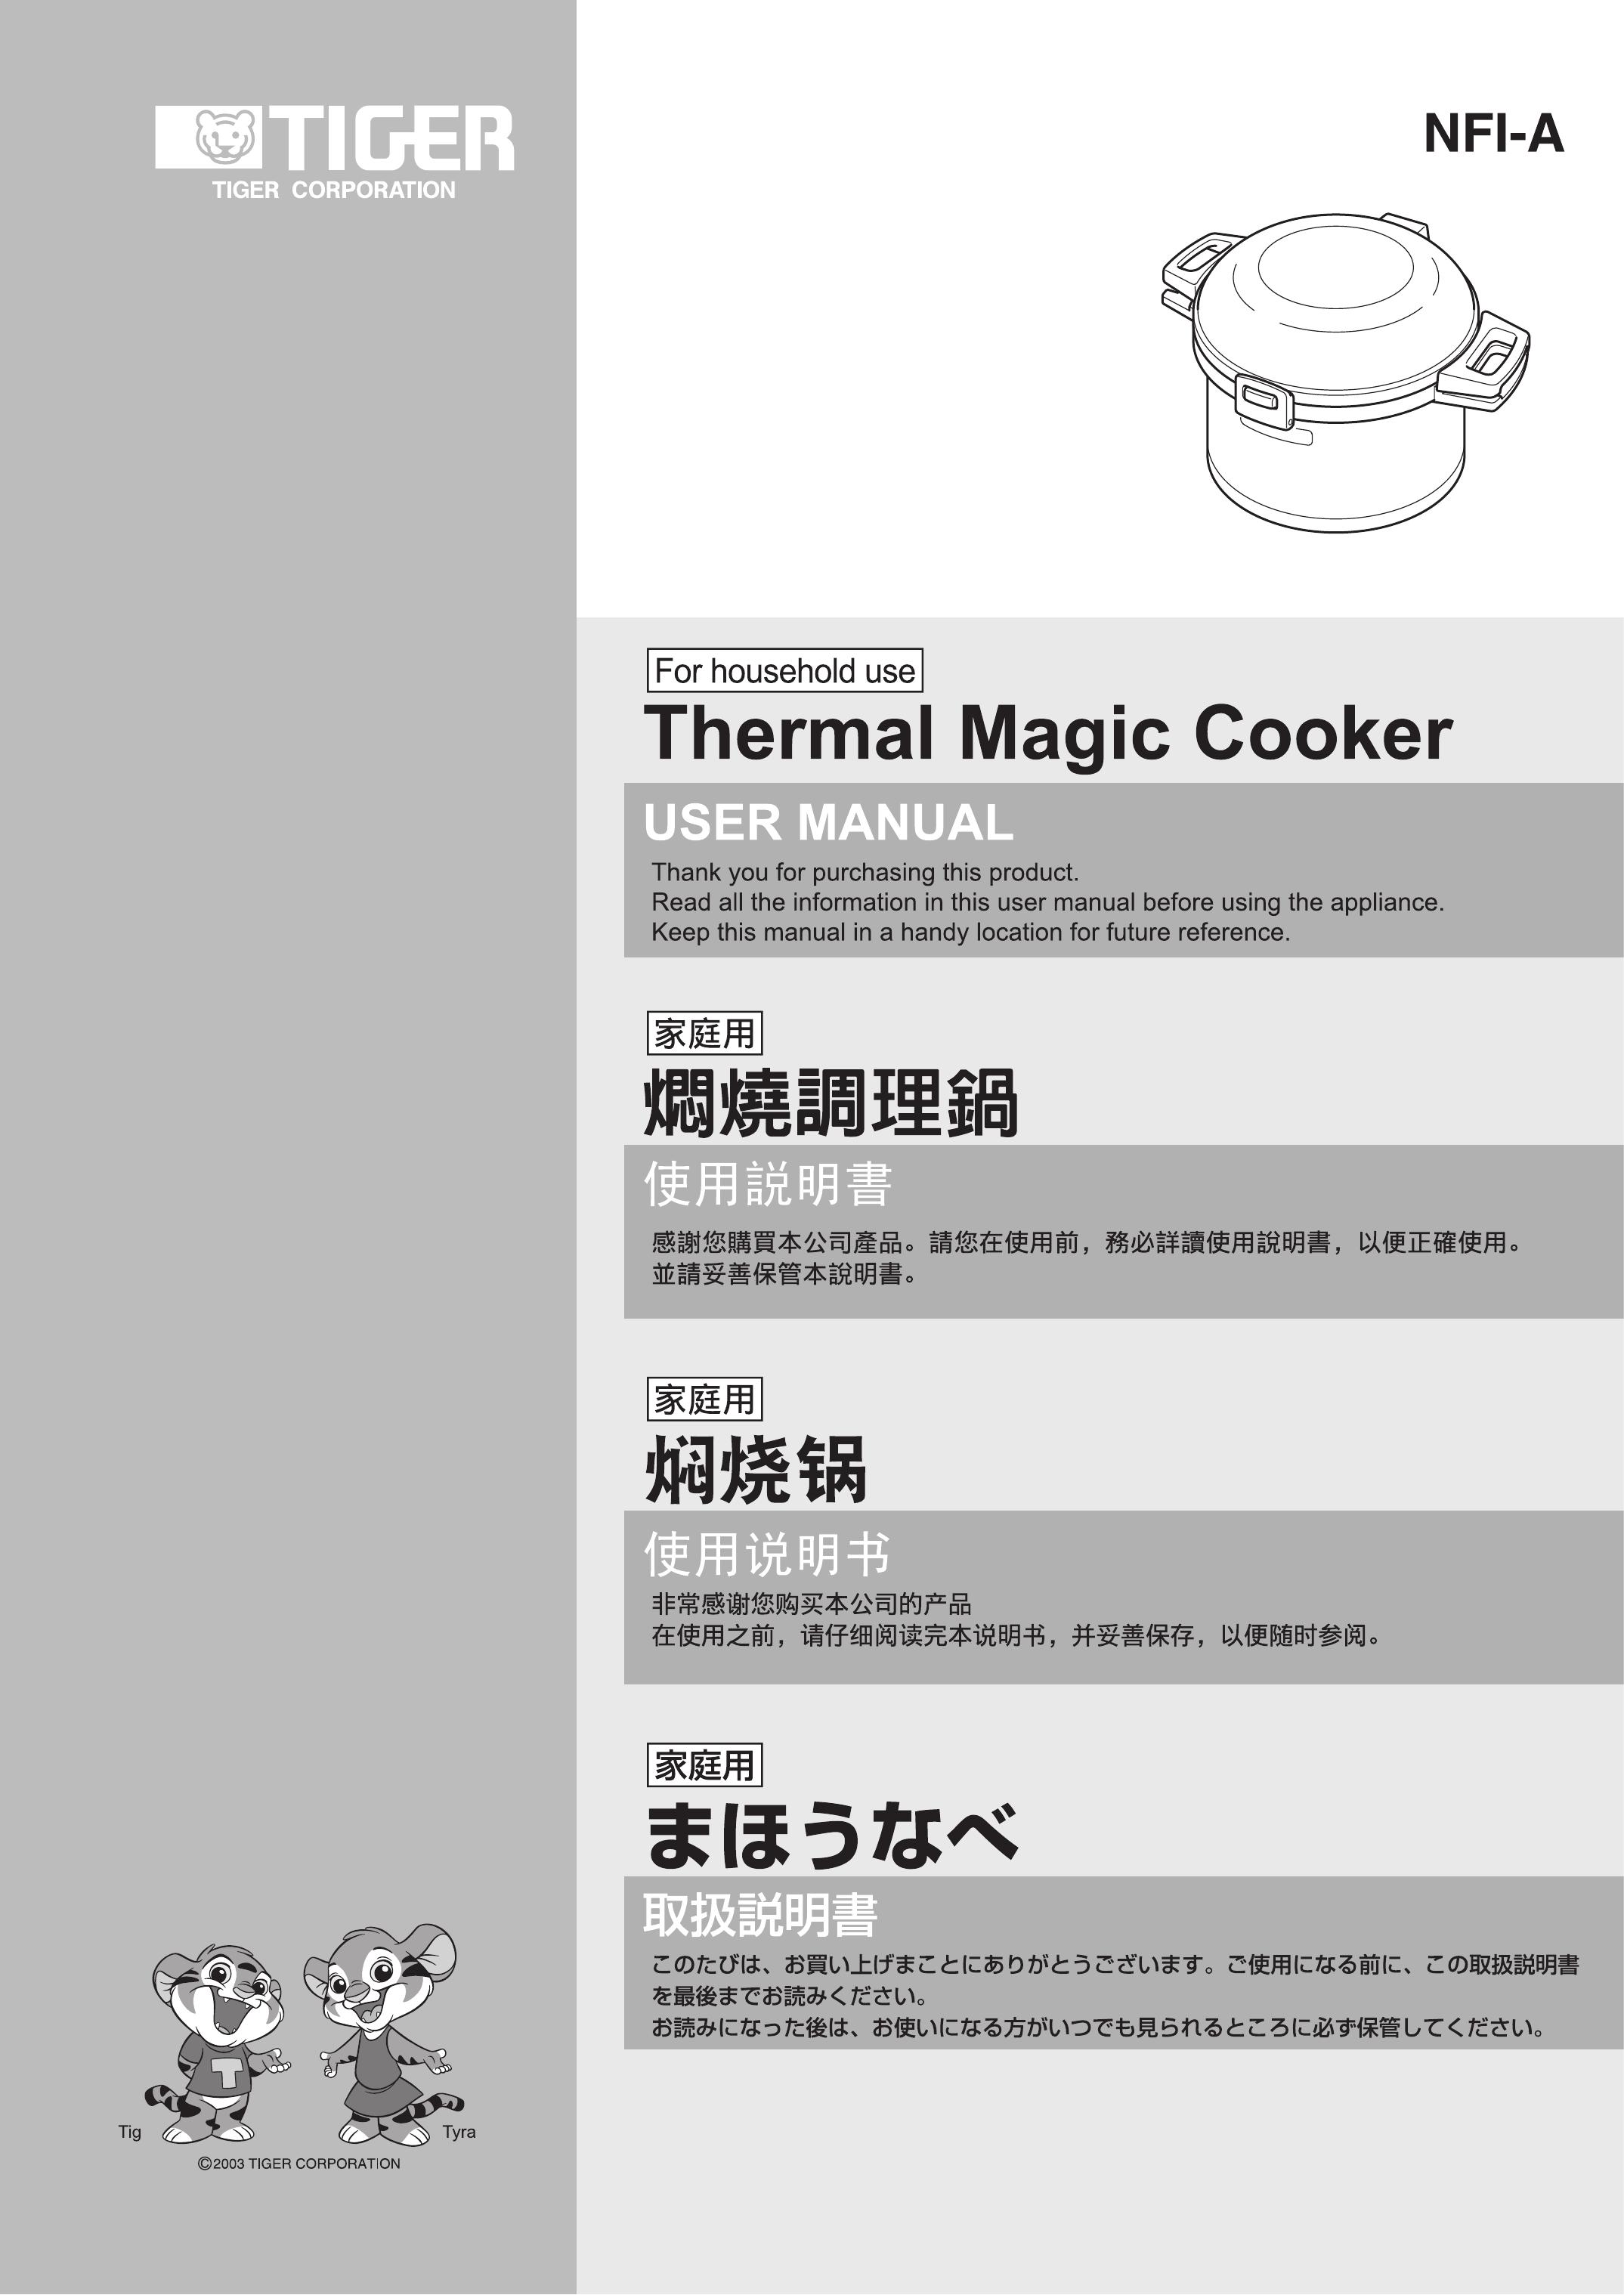 Tiger Products Co., Ltd NFI-A Rice Cooker User Manual